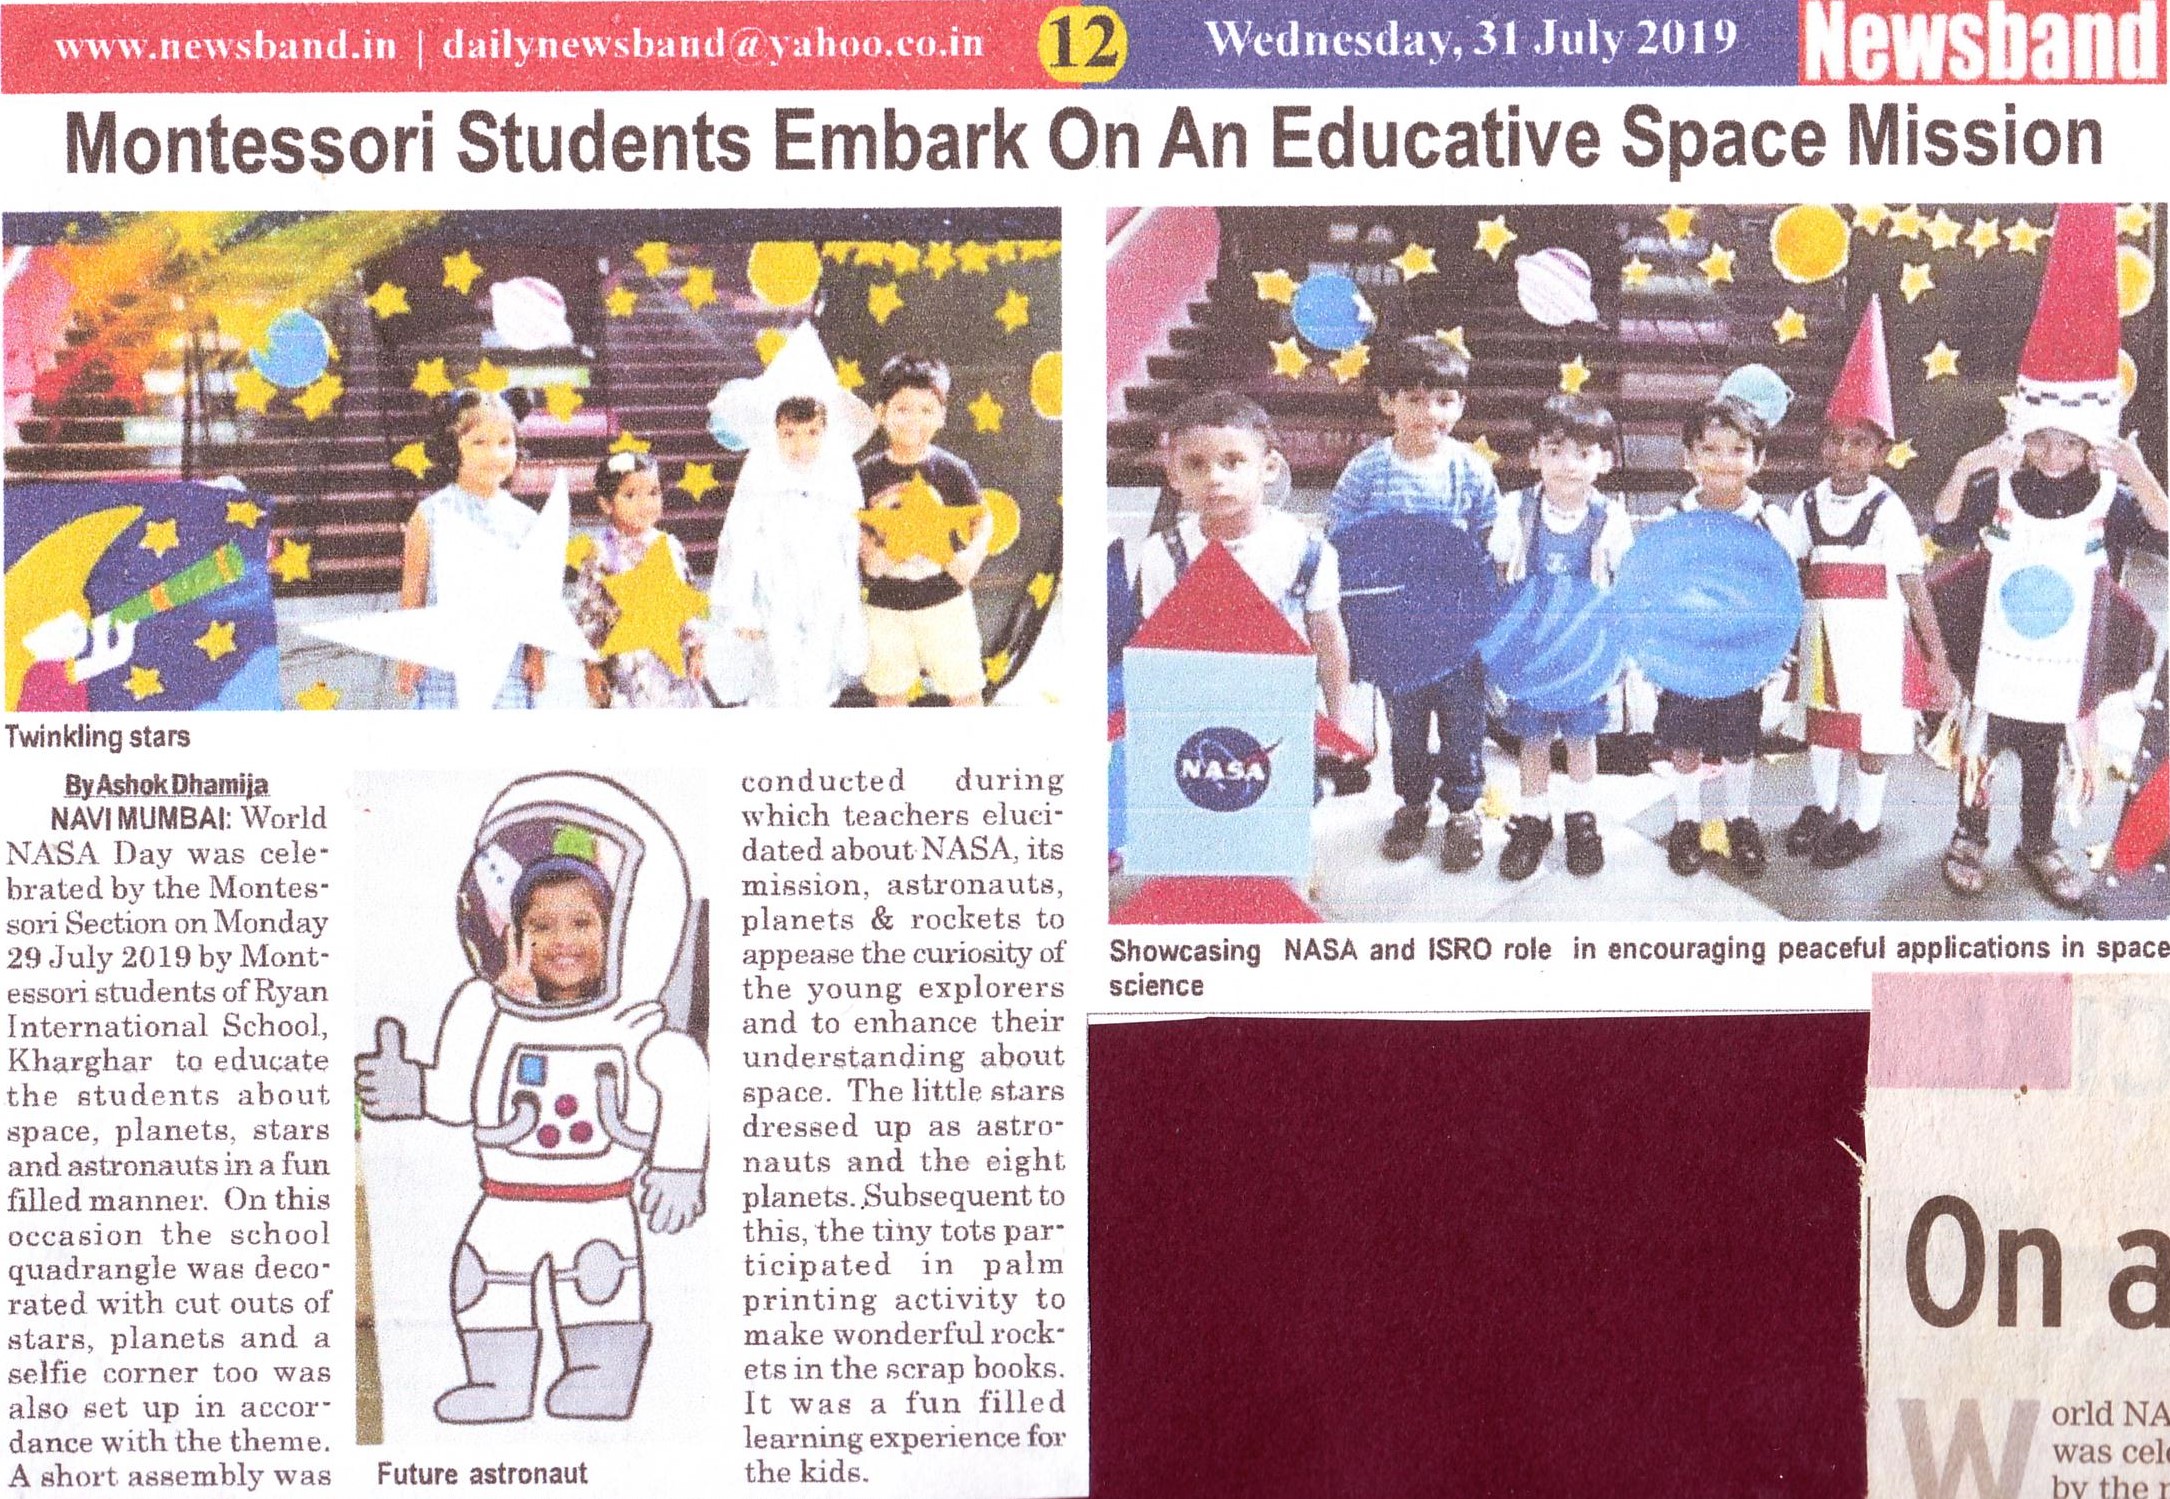 Montessori students embark on an educative space mission was mentioned in News band - Ryan International School, Kharghar